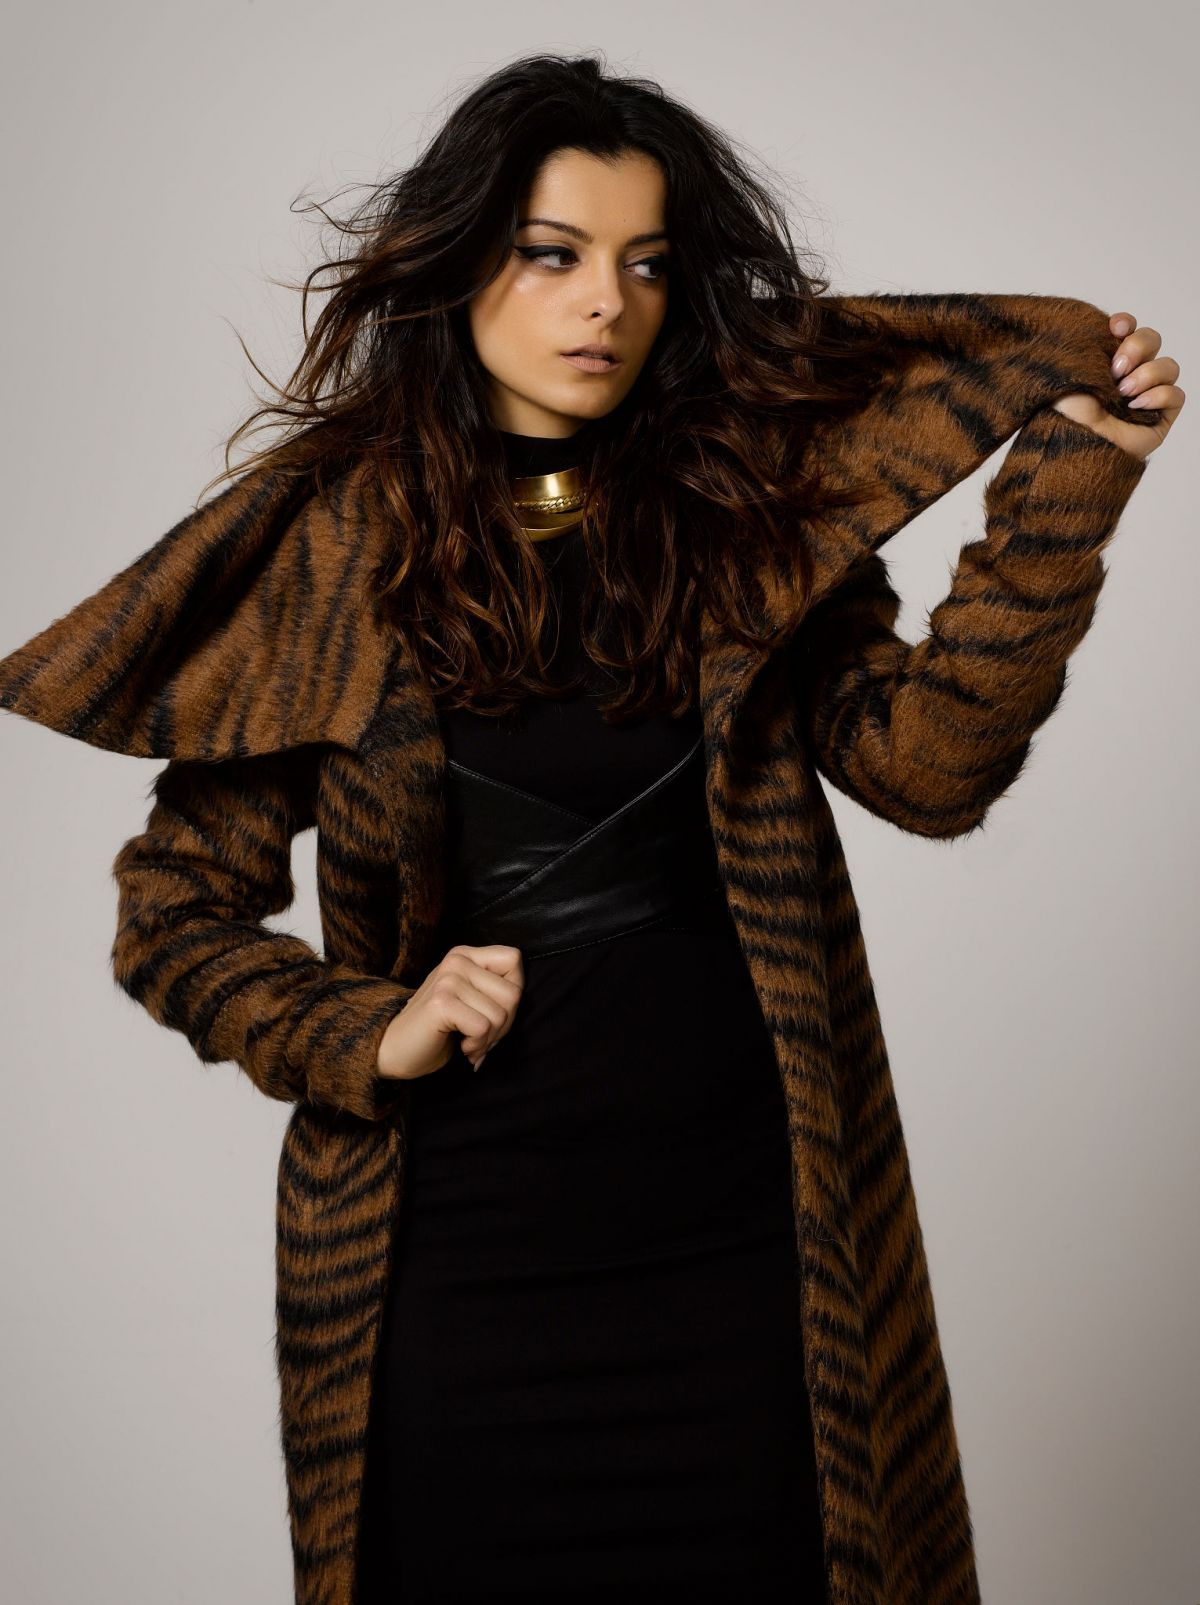 BEBE REXHA for The Untitled Magazine, 2015 – HawtCelebs1200 x 1605